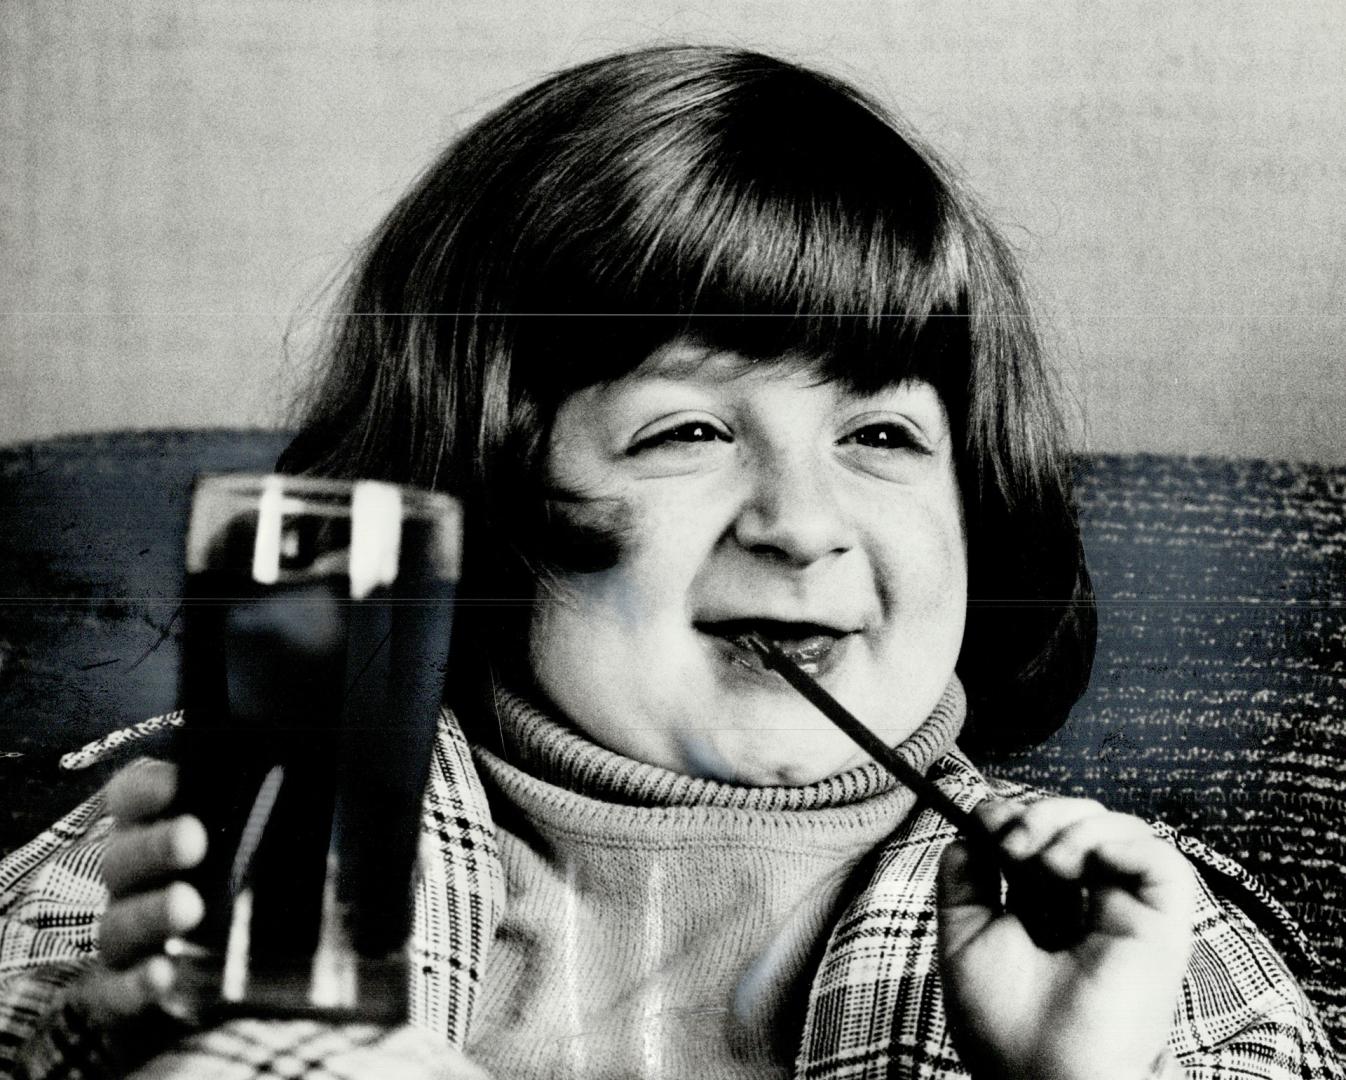 Mason Reese, the 'Borgasmord Kid,' is in Toronto to co-host tonight's edition of Norm Perry Show